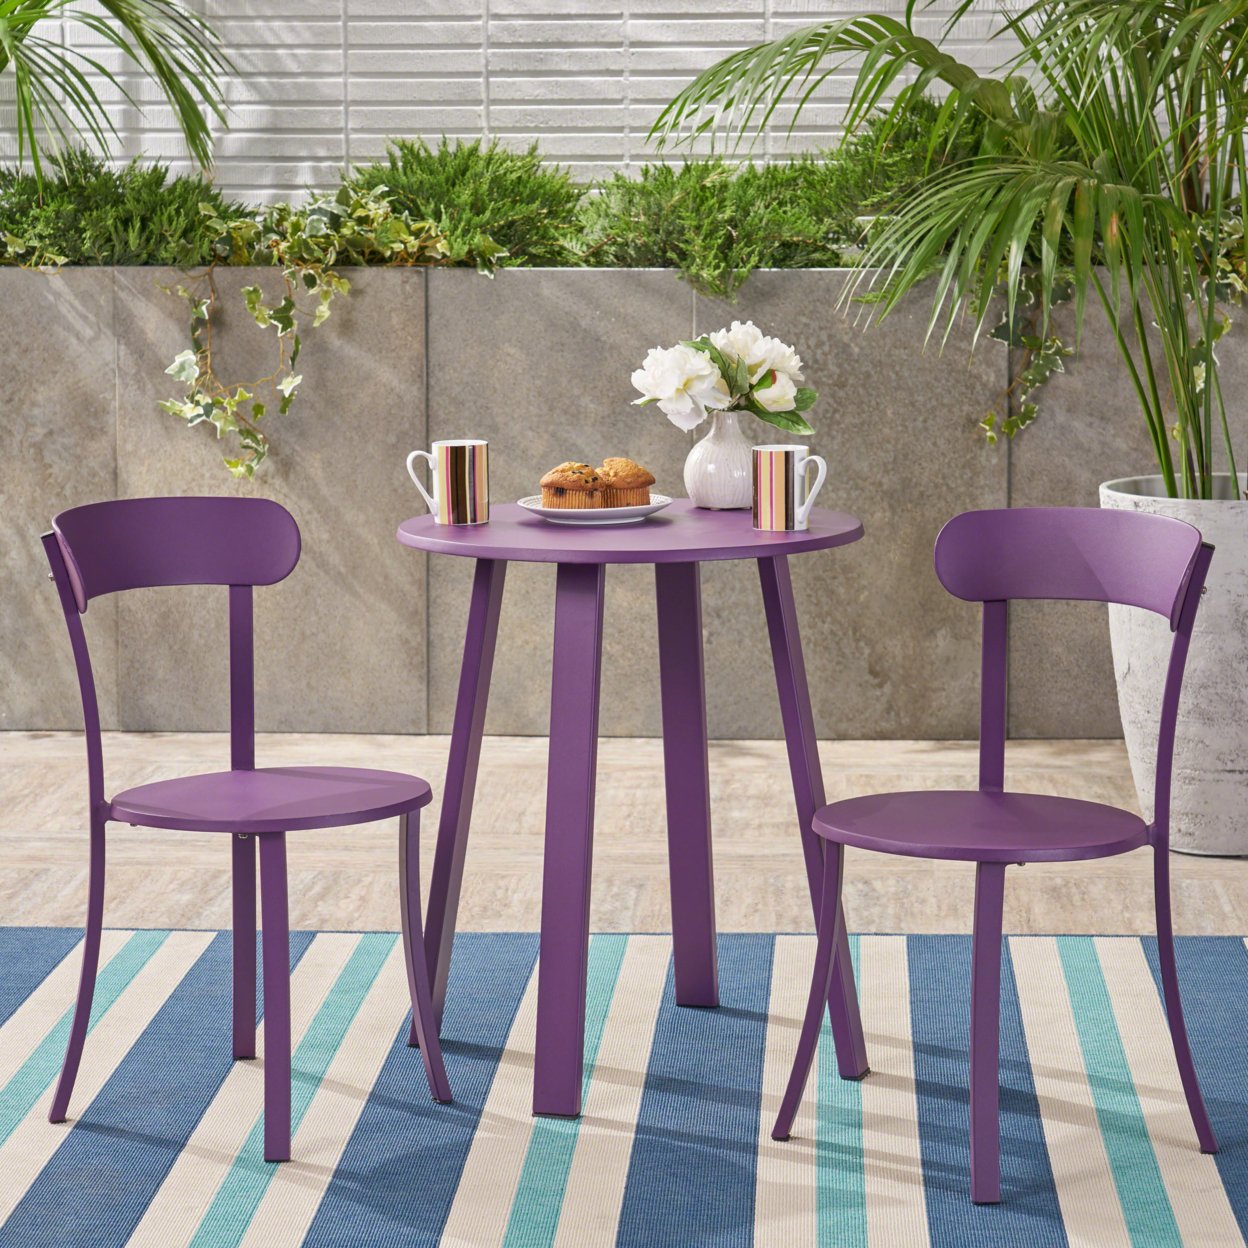 Kelly Outdoor Iron Bistro Table & Chair Set, Multiple Colors - Teal